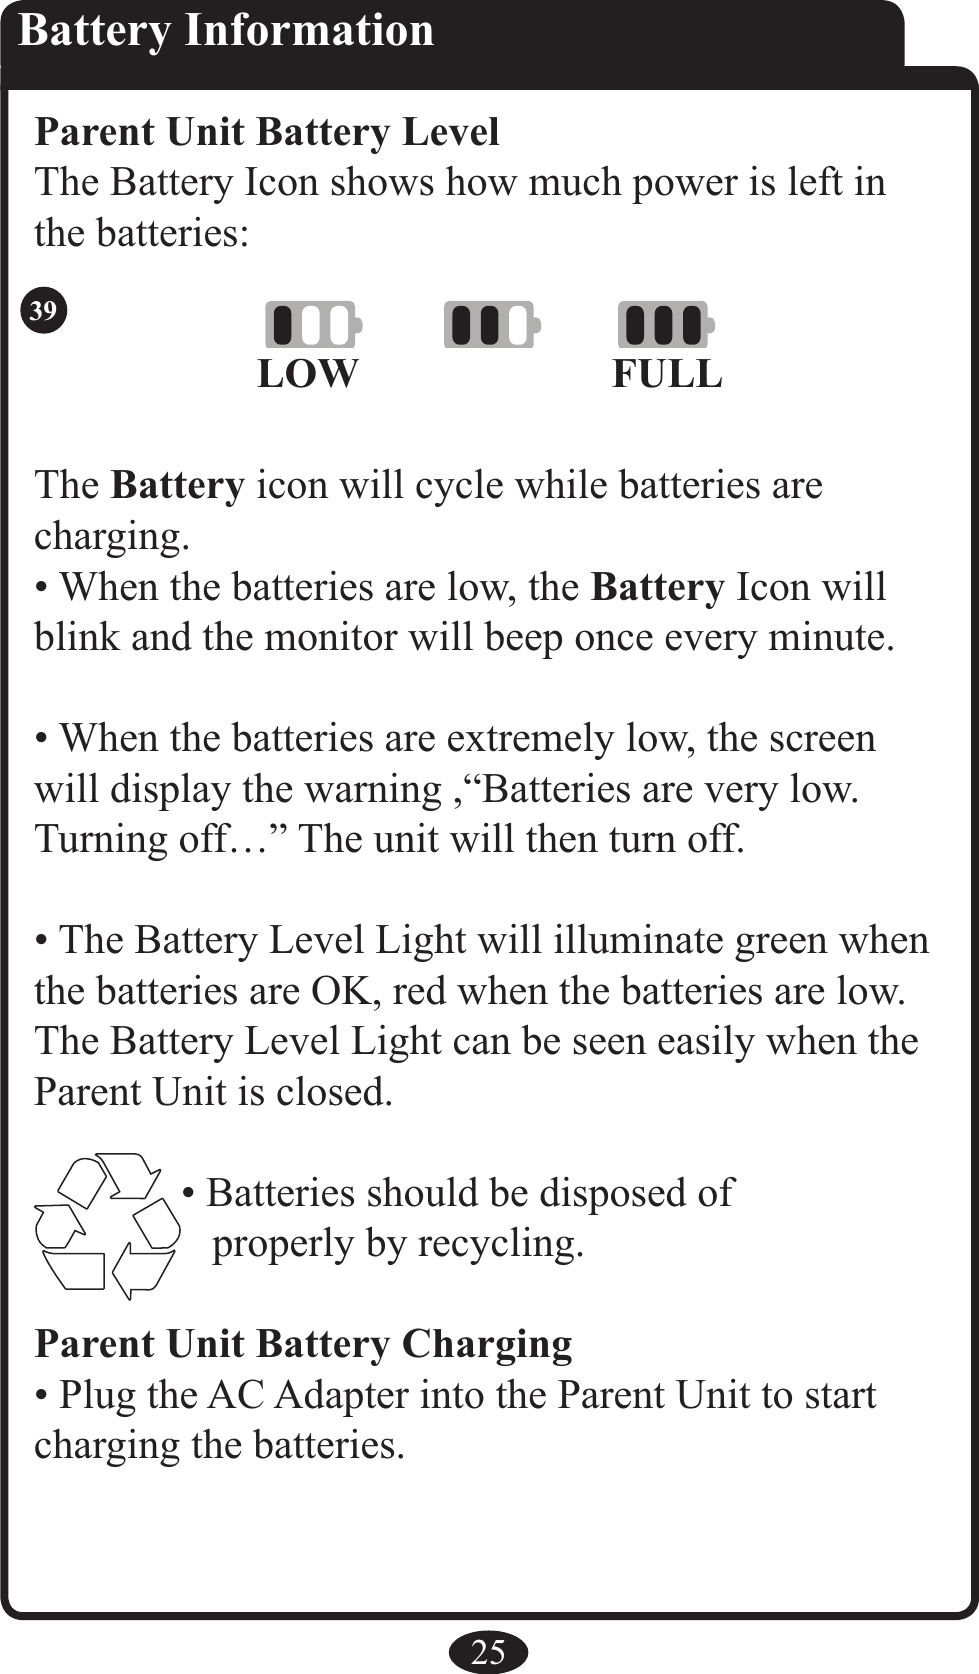 25Battery InformationParent Unit Battery LevelThe Battery Icon shows how much power is left in the batteries:The Battery icon will cycle while batteries arecharging.• When the batteries are low, the Battery Icon will blink and the monitor will beep once every minute.• When the batteries are extremely low, the screen will display the warning ,“Batteries are very low. Turning off…” The unit will then turn off.• The Battery Level Light will illuminate green when the batteries are OK, red when the batteries are low. The Battery Level Light can be seen easily when the Parent Unit is closed.• Batteries should be disposed of    properly by recycling.Parent Unit Battery Charging• Plug the AC Adapter into the Parent Unit to start charging the batteries.LOW FULL39